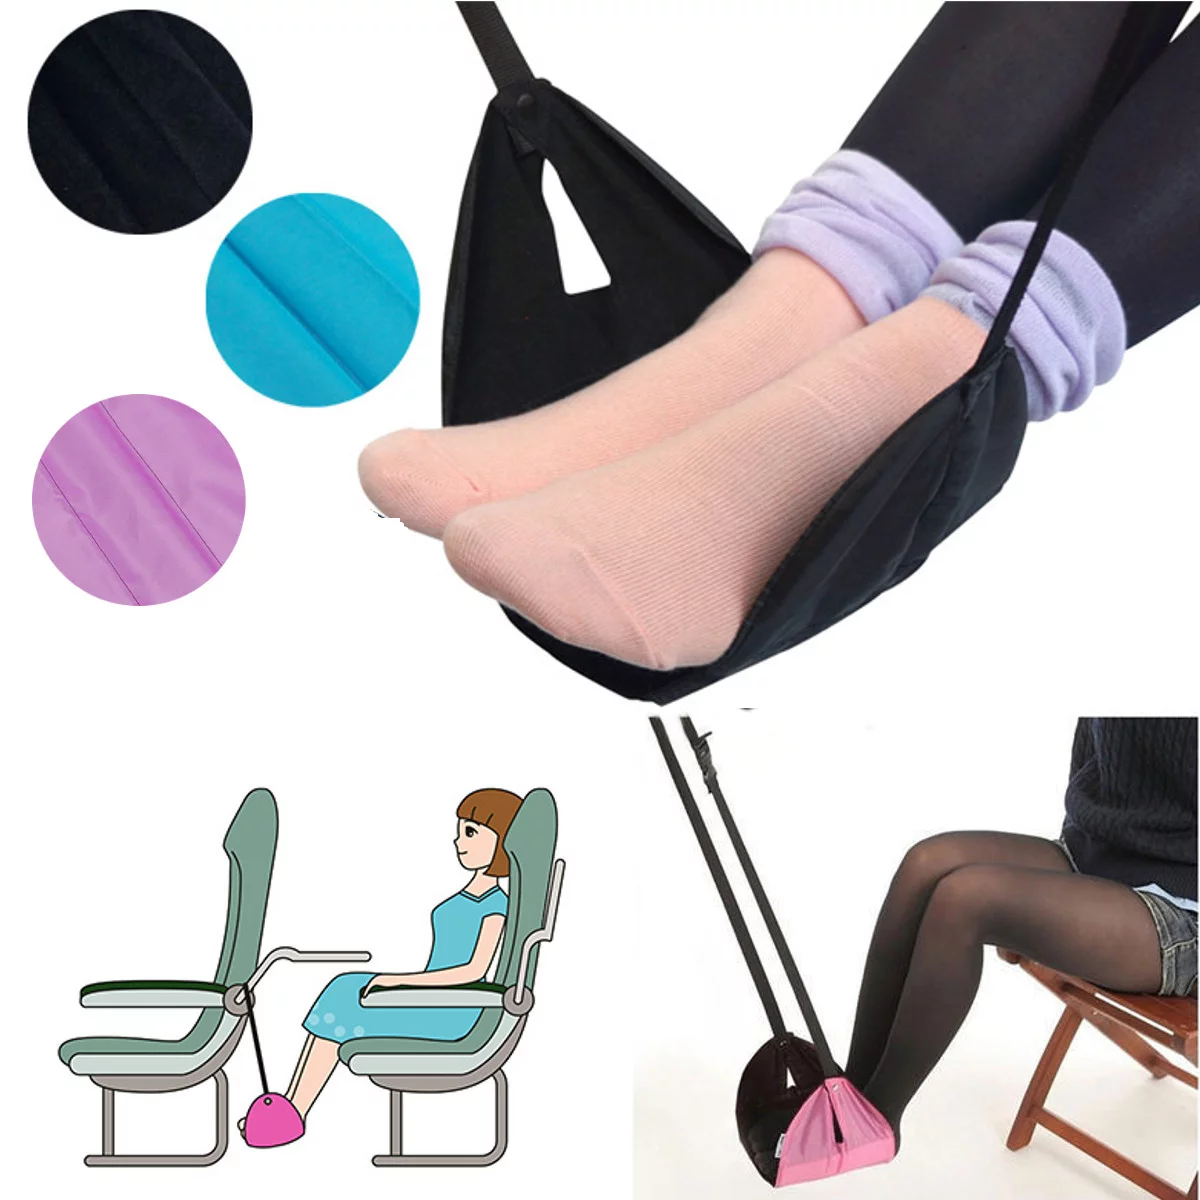 Basic Concepts Airplane Footrest (2 Pack) Perfect Foot Hammock Airplane or Office Footrest to Relax Your Feet - Airplane Foot Hammock for Airplane Tra